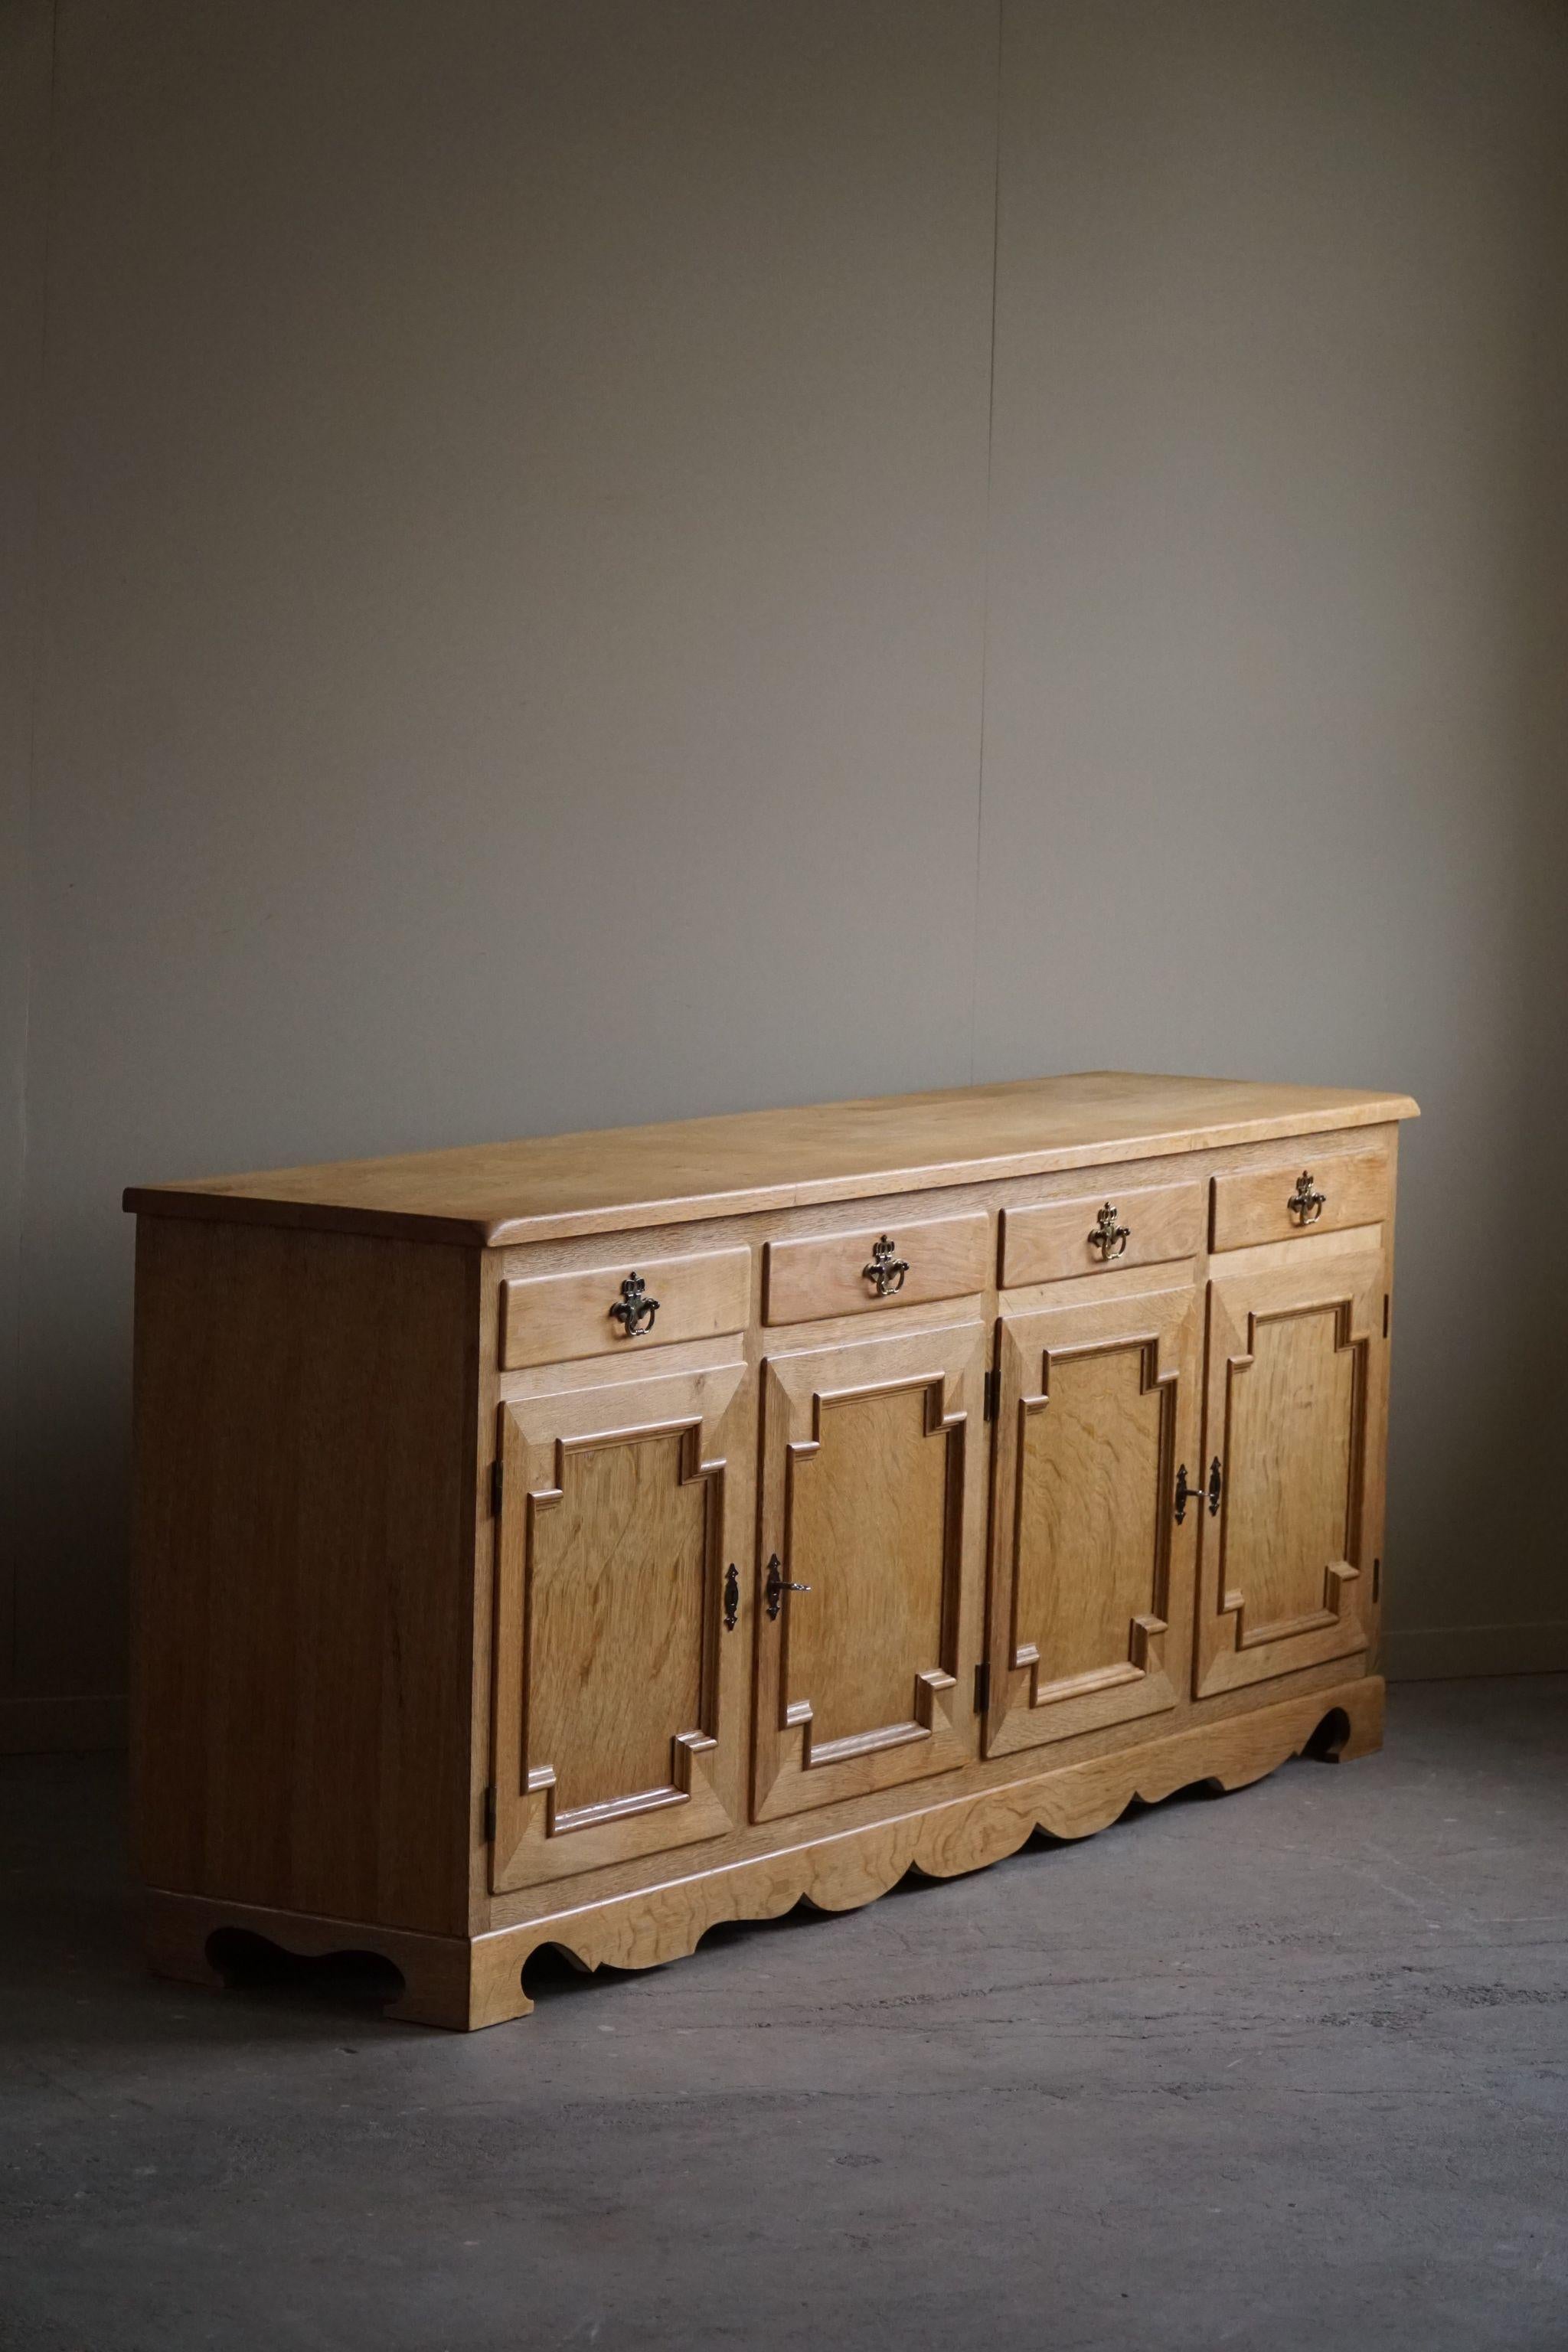 A fine rectangular classic buffet cabinet / sideboard in oak with brass handles. Made by a Danish cabinetmaker in the 1960s. Beautiful sculptural front design and lovely warm patina.
This piece is in a very good vintage condition.

A fine brutalist